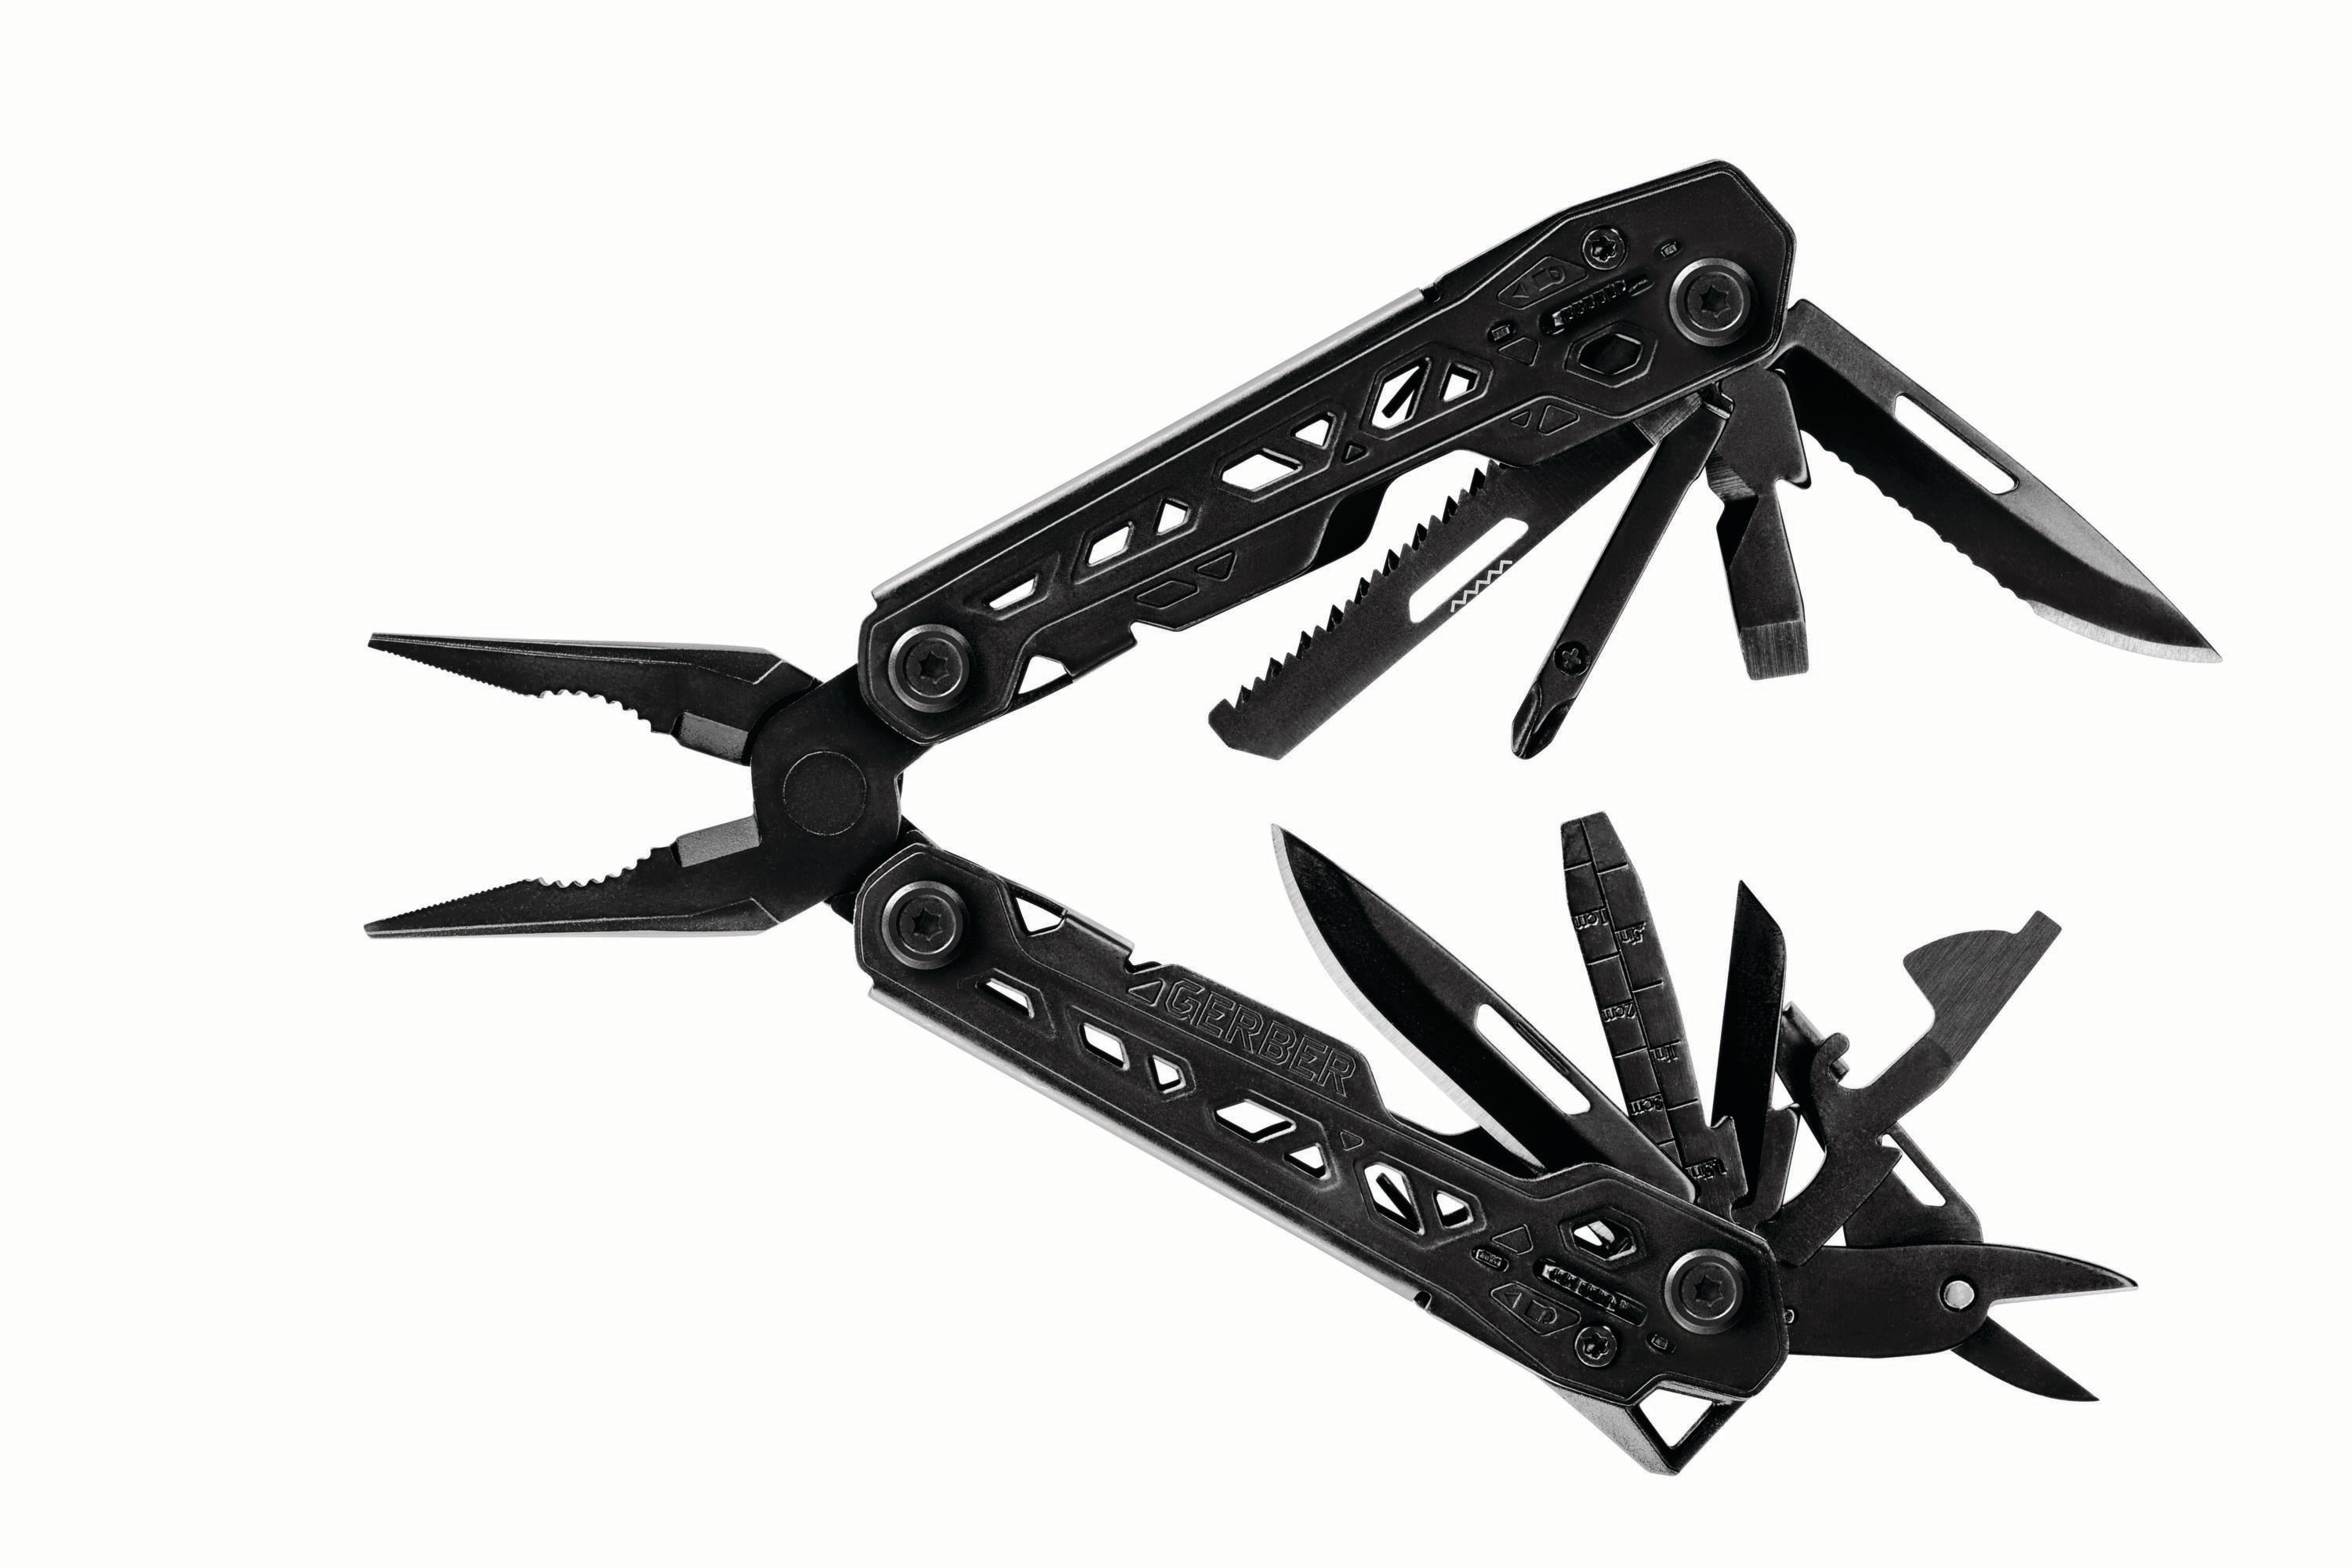 Gerber Gerber Truss Black Multi-Tool with 17 Tools, Spring-Loaded Pliers,  Fine Blade, and Case in the Multi-Tools department at